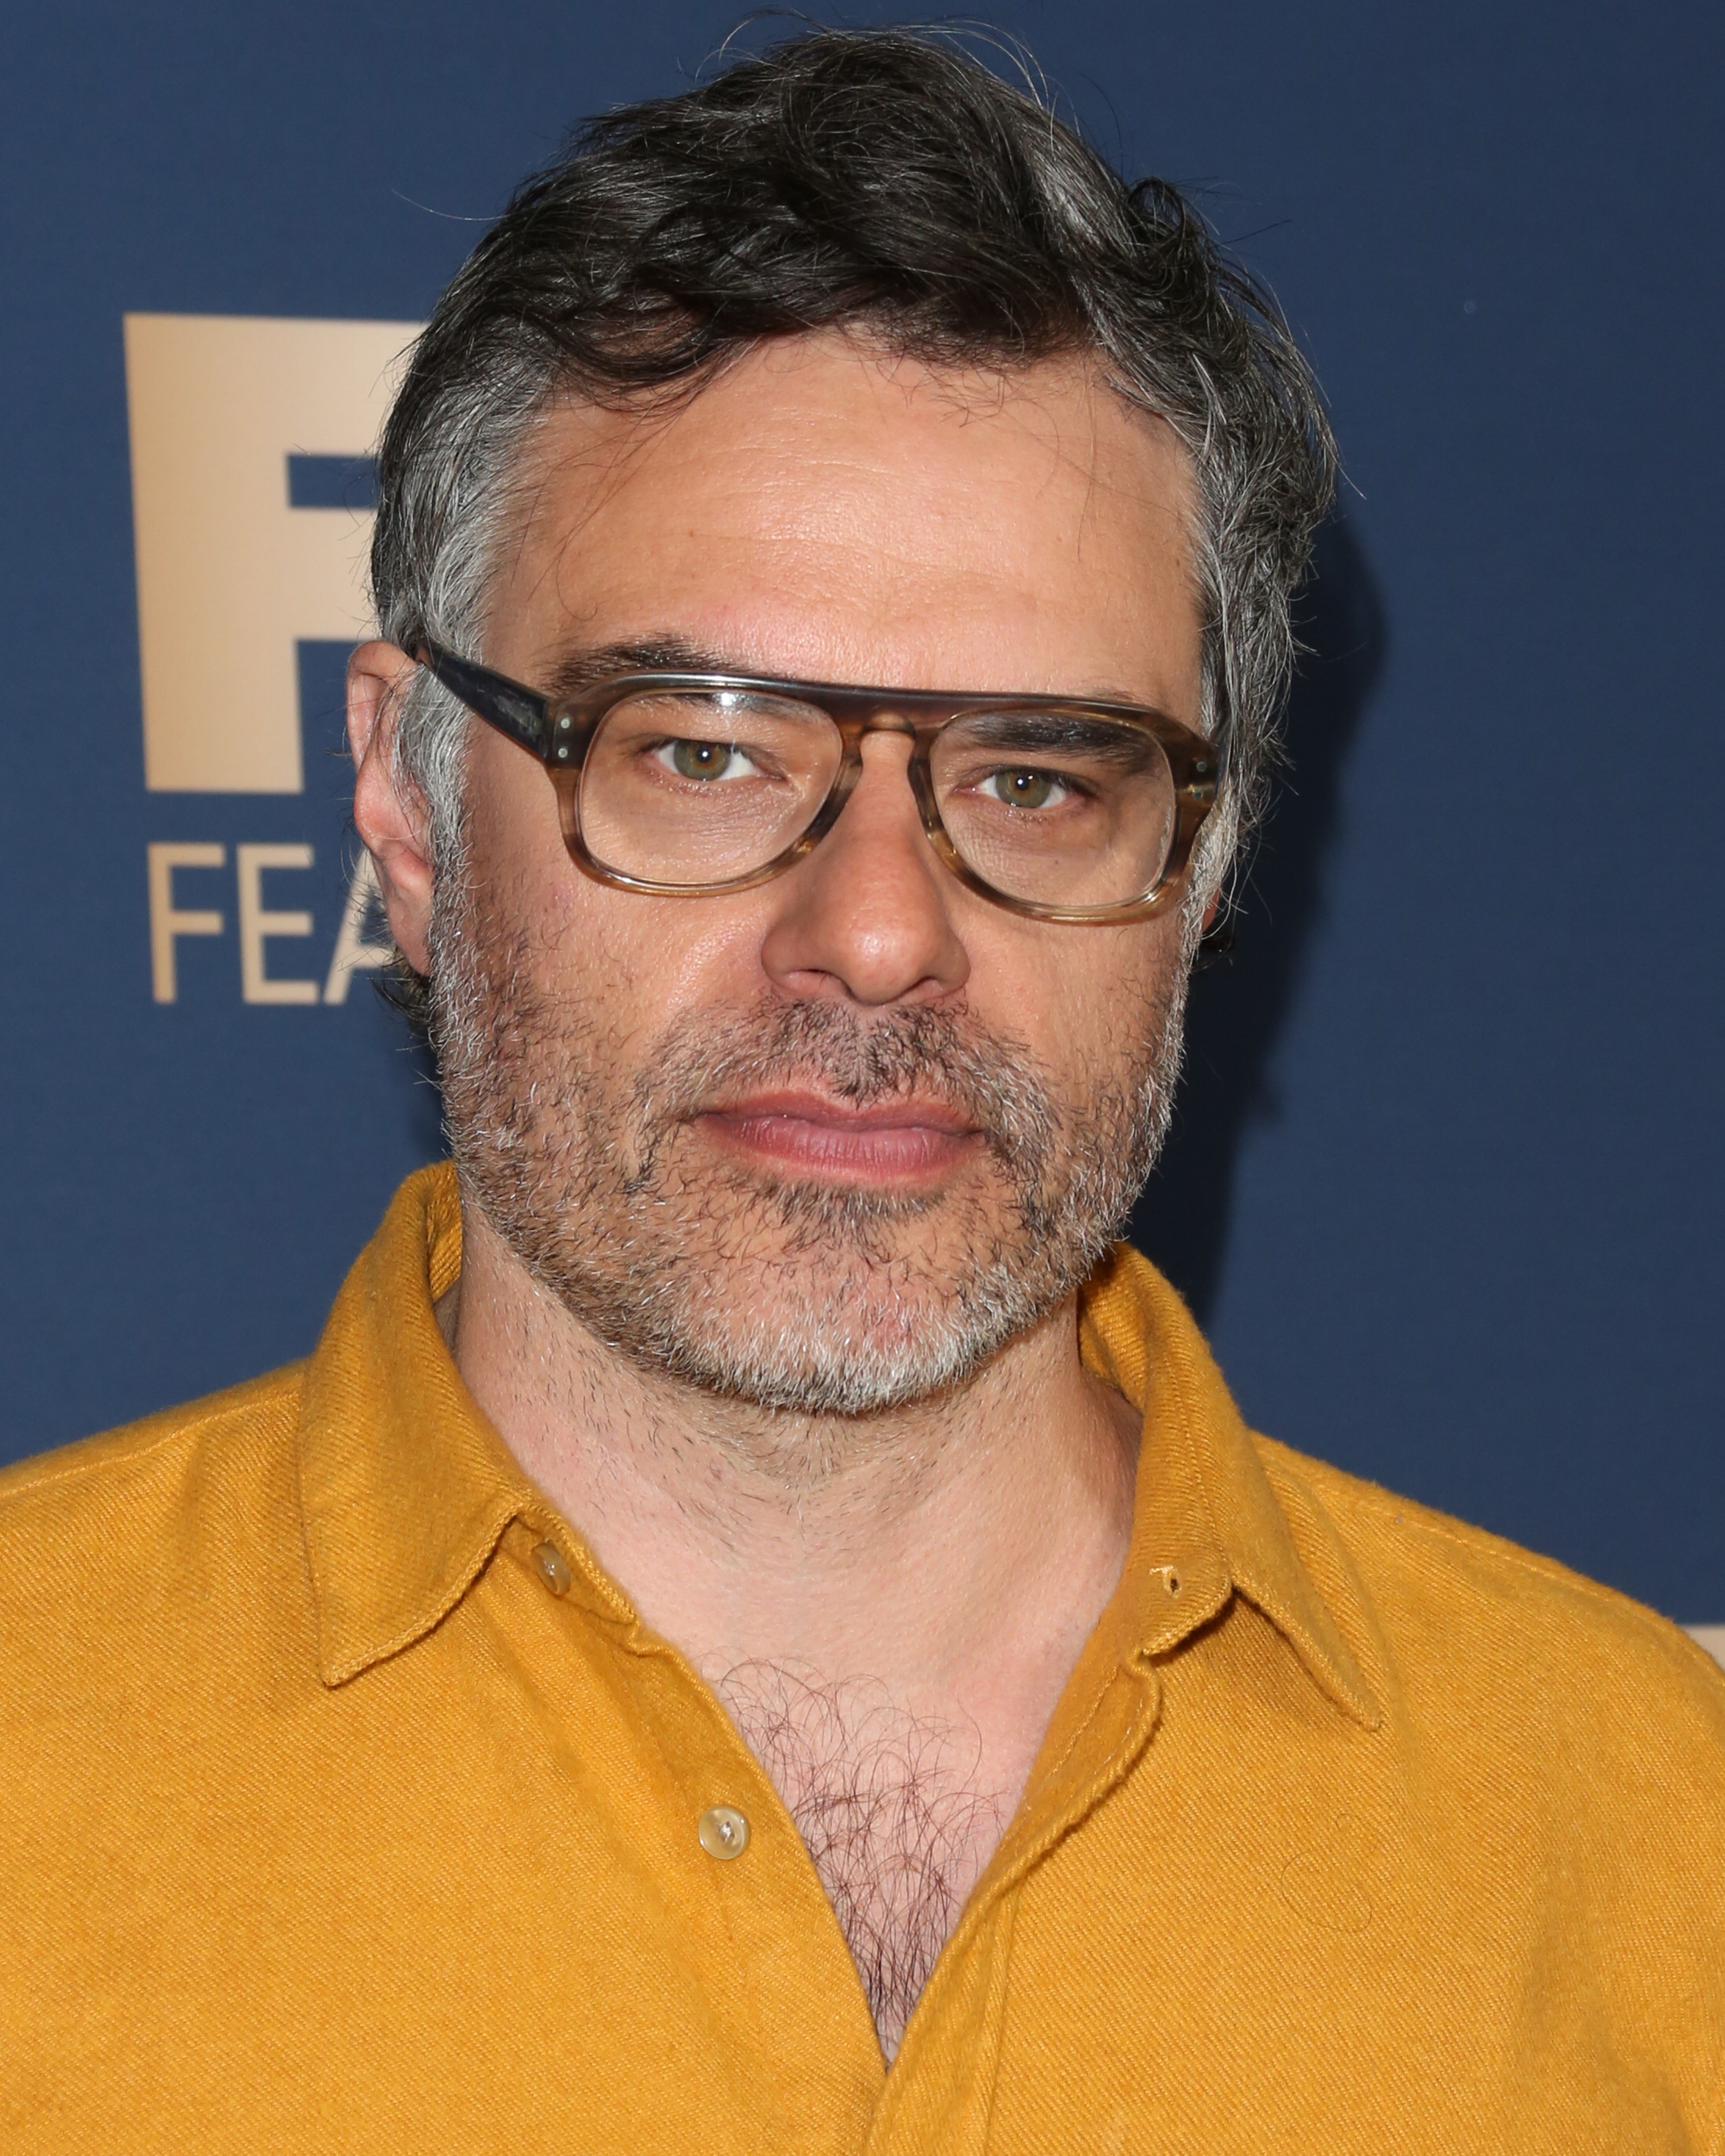 Jemaine Clemente at an FX Press Tour